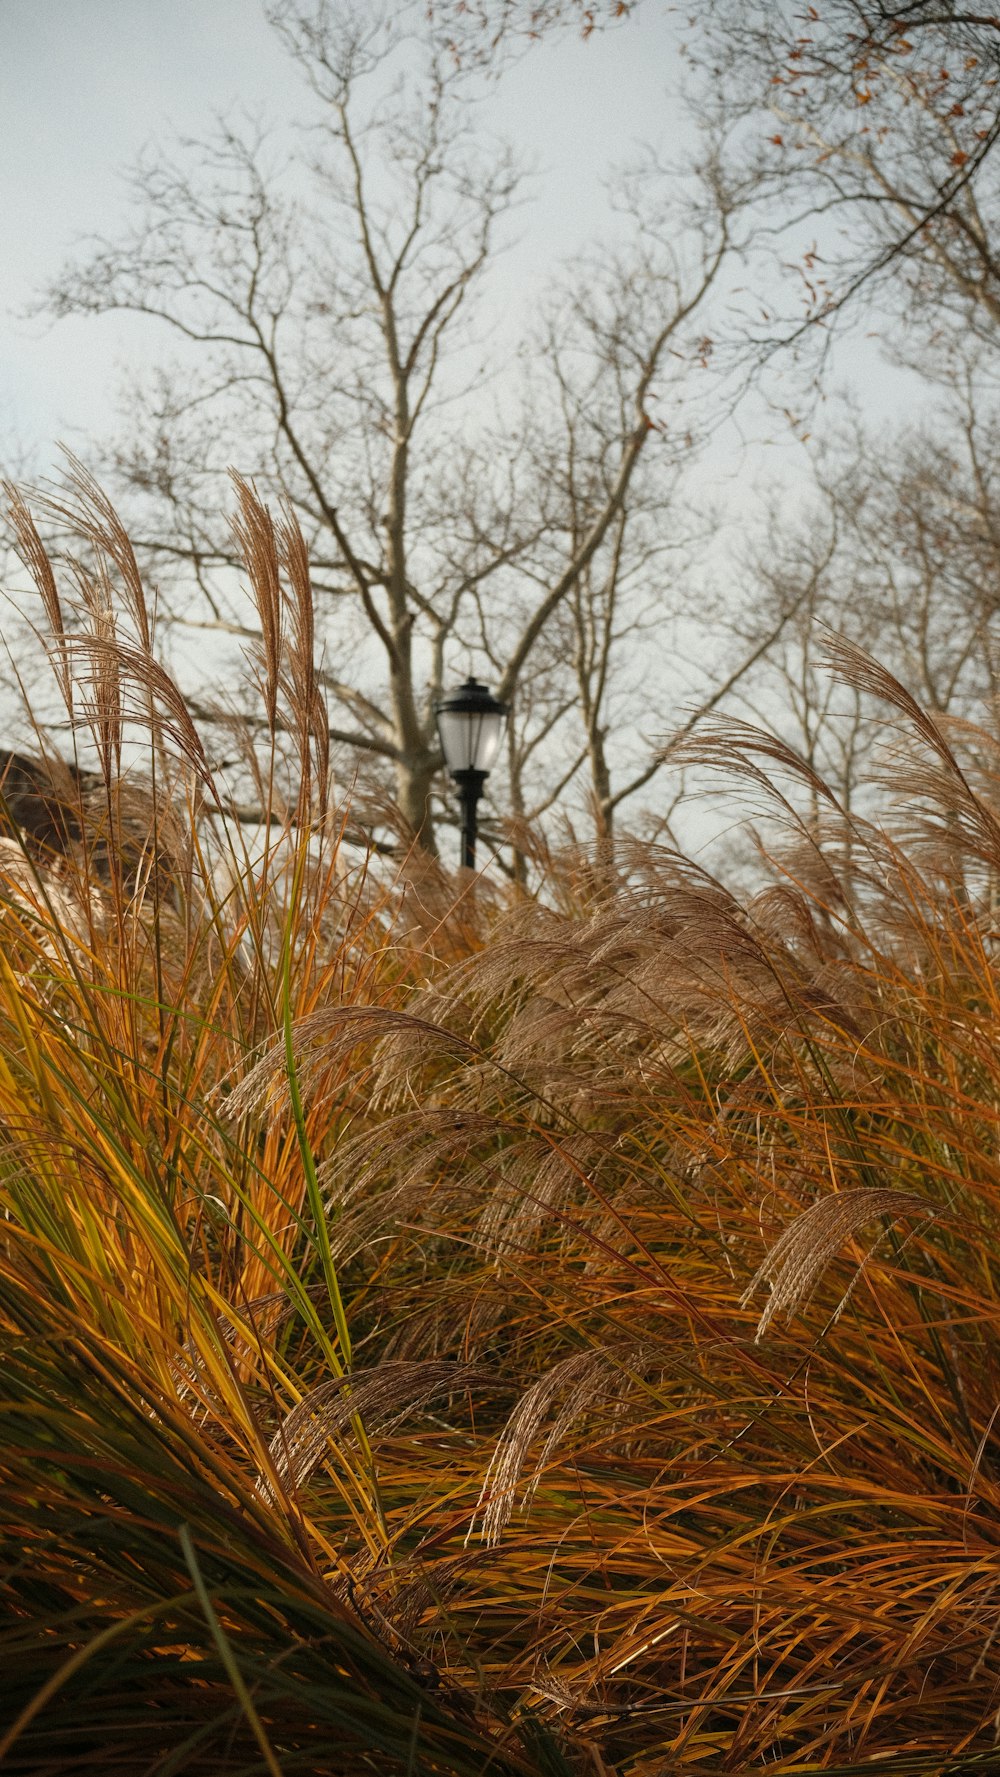 a street light in the middle of a field of tall grass